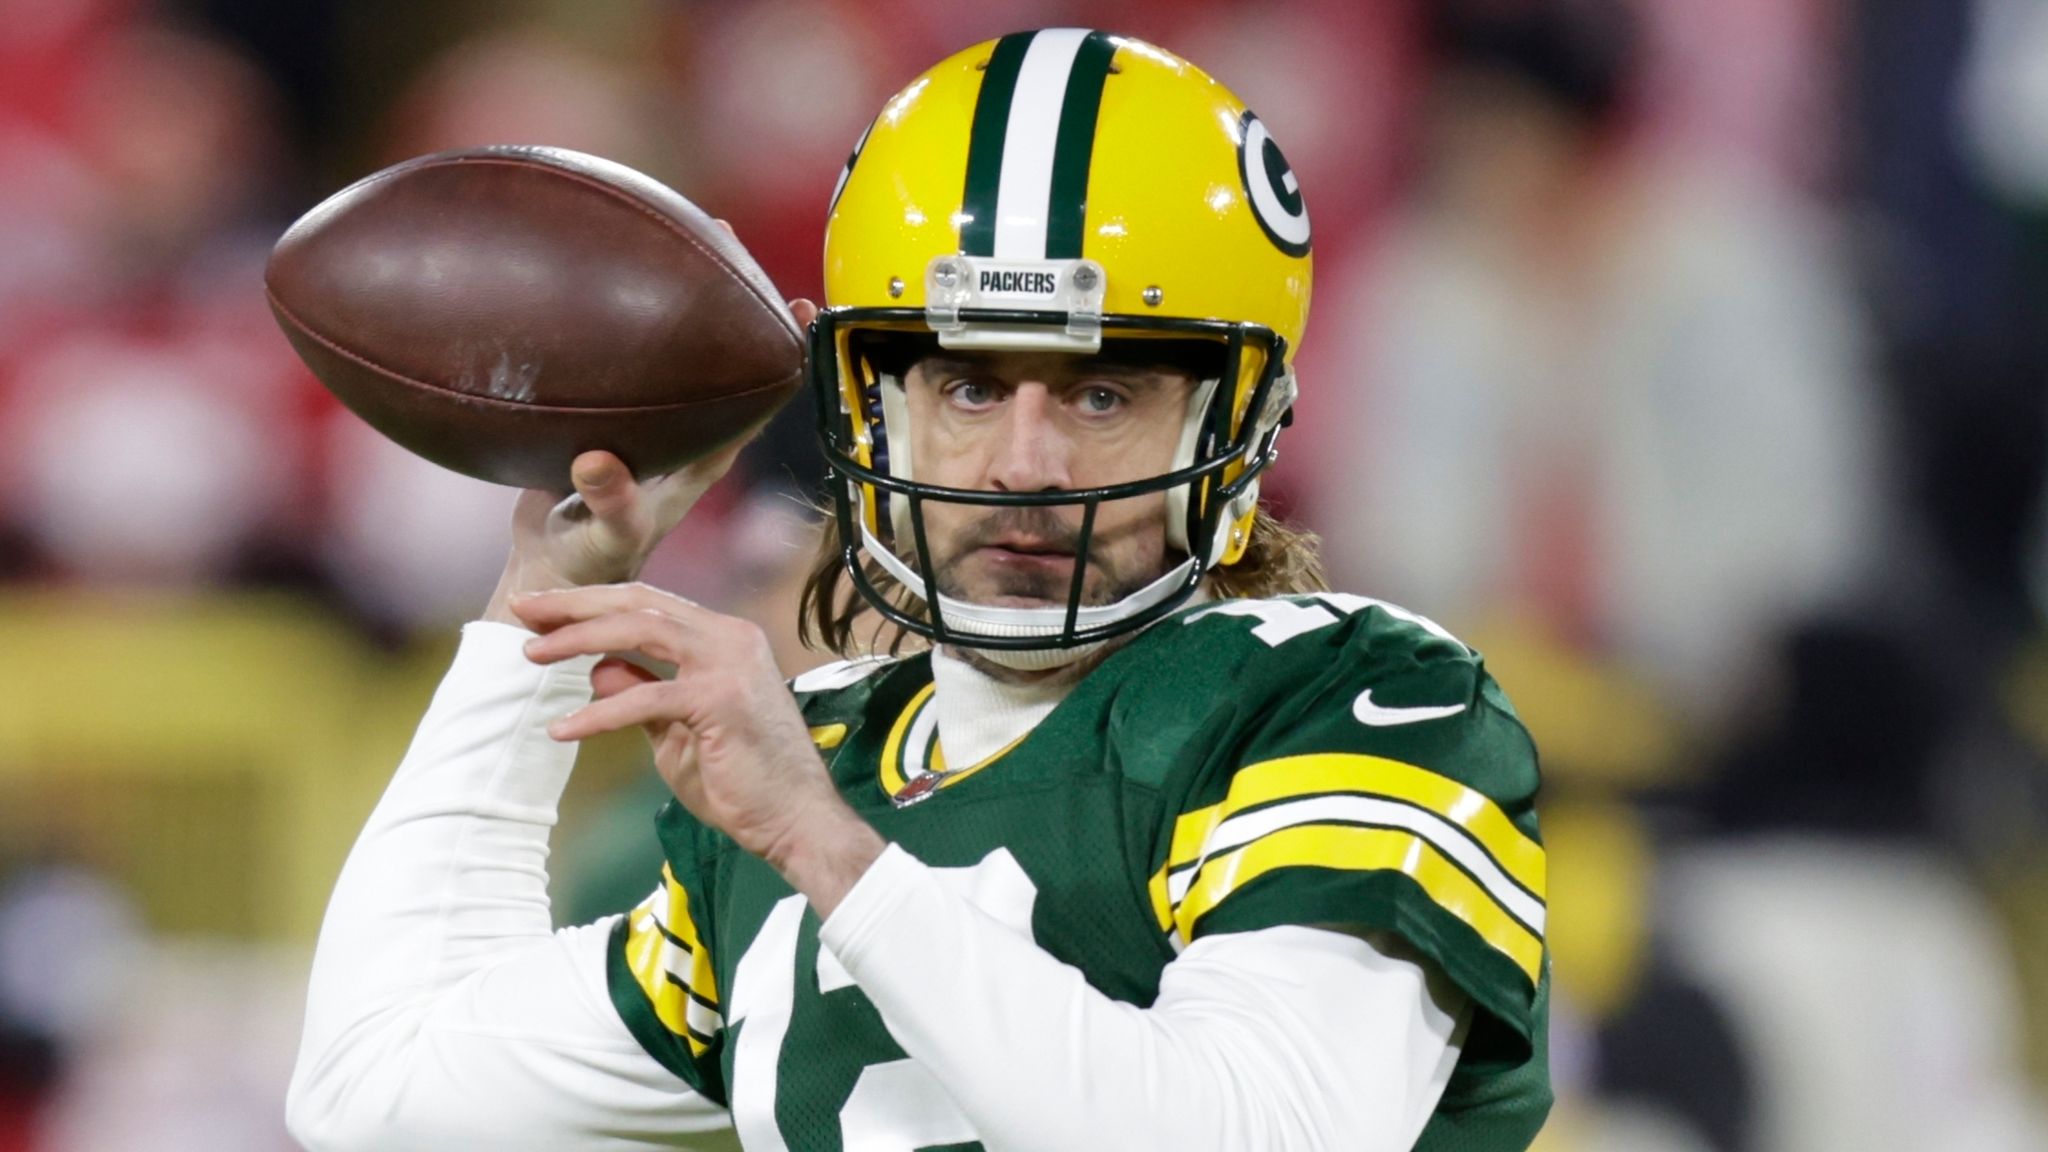 Aaron Rodgers: Green Bay Packers quarterback set to become